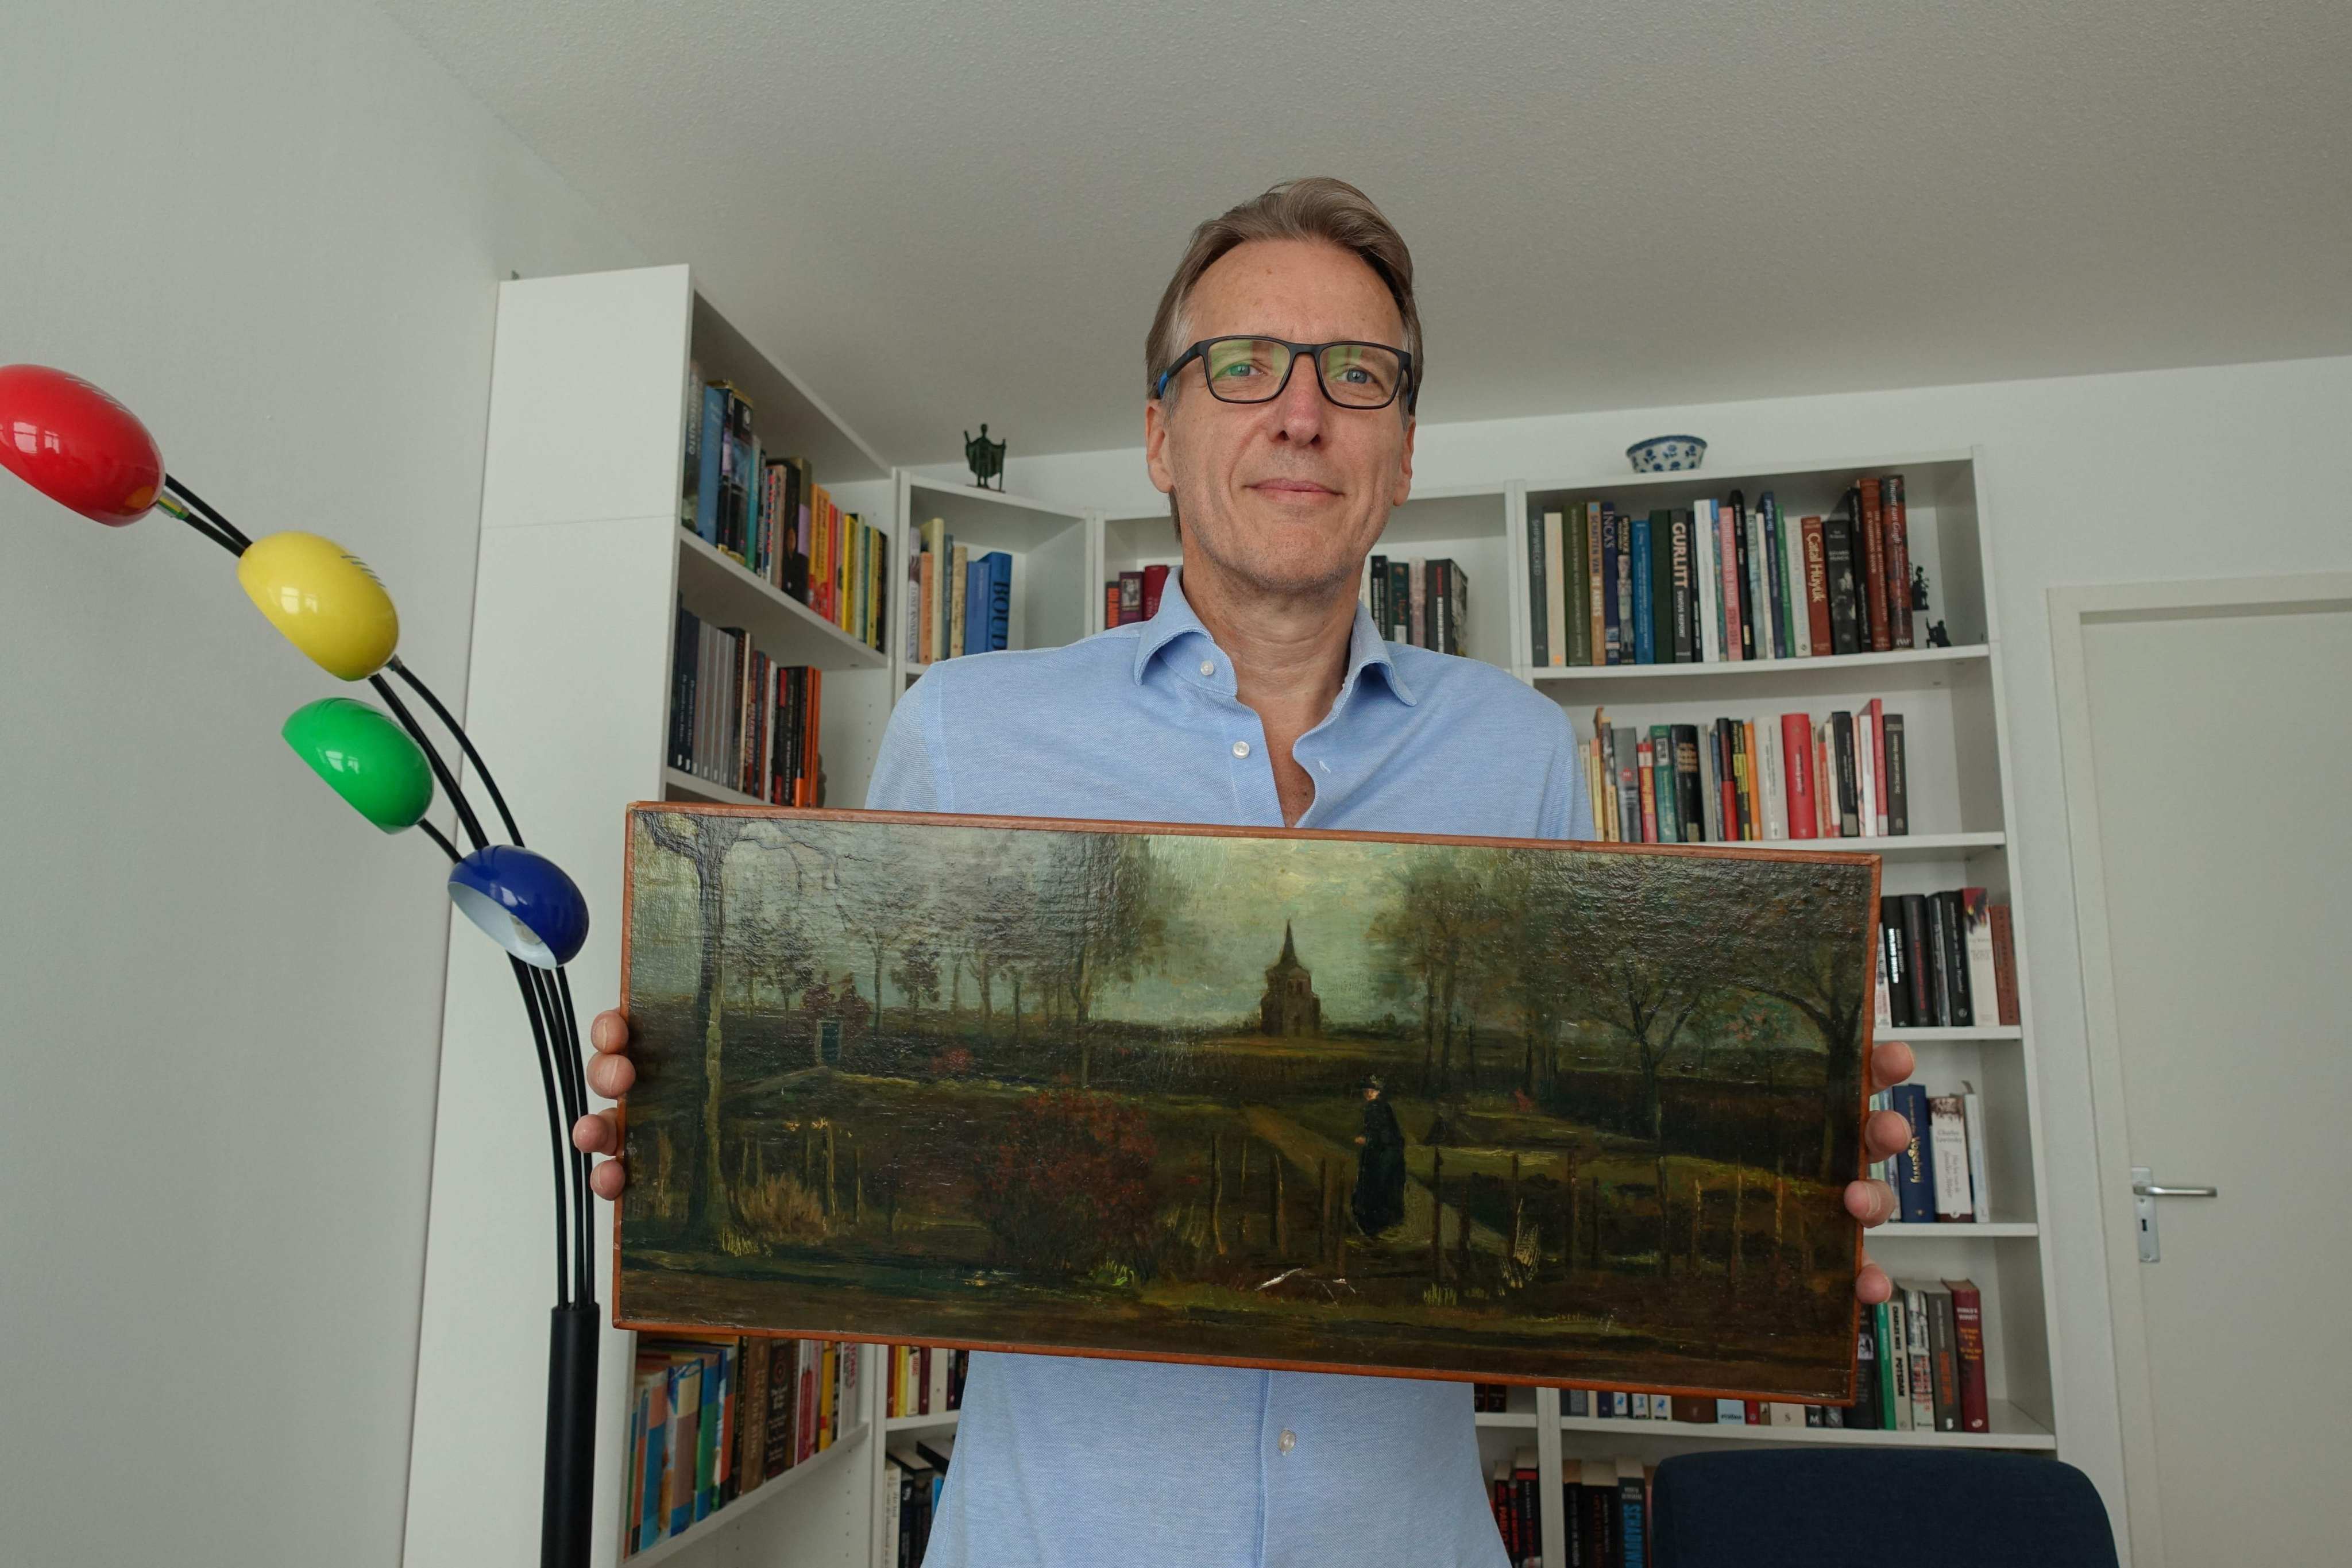 Arthur Brand has recovered a precious Vincent van Gogh painting that was stolen from a museum in a daring midnight heist during the coronavirus lockdown three-and-a-half years ago. Photo: Handout/Arthur Brand/AFP